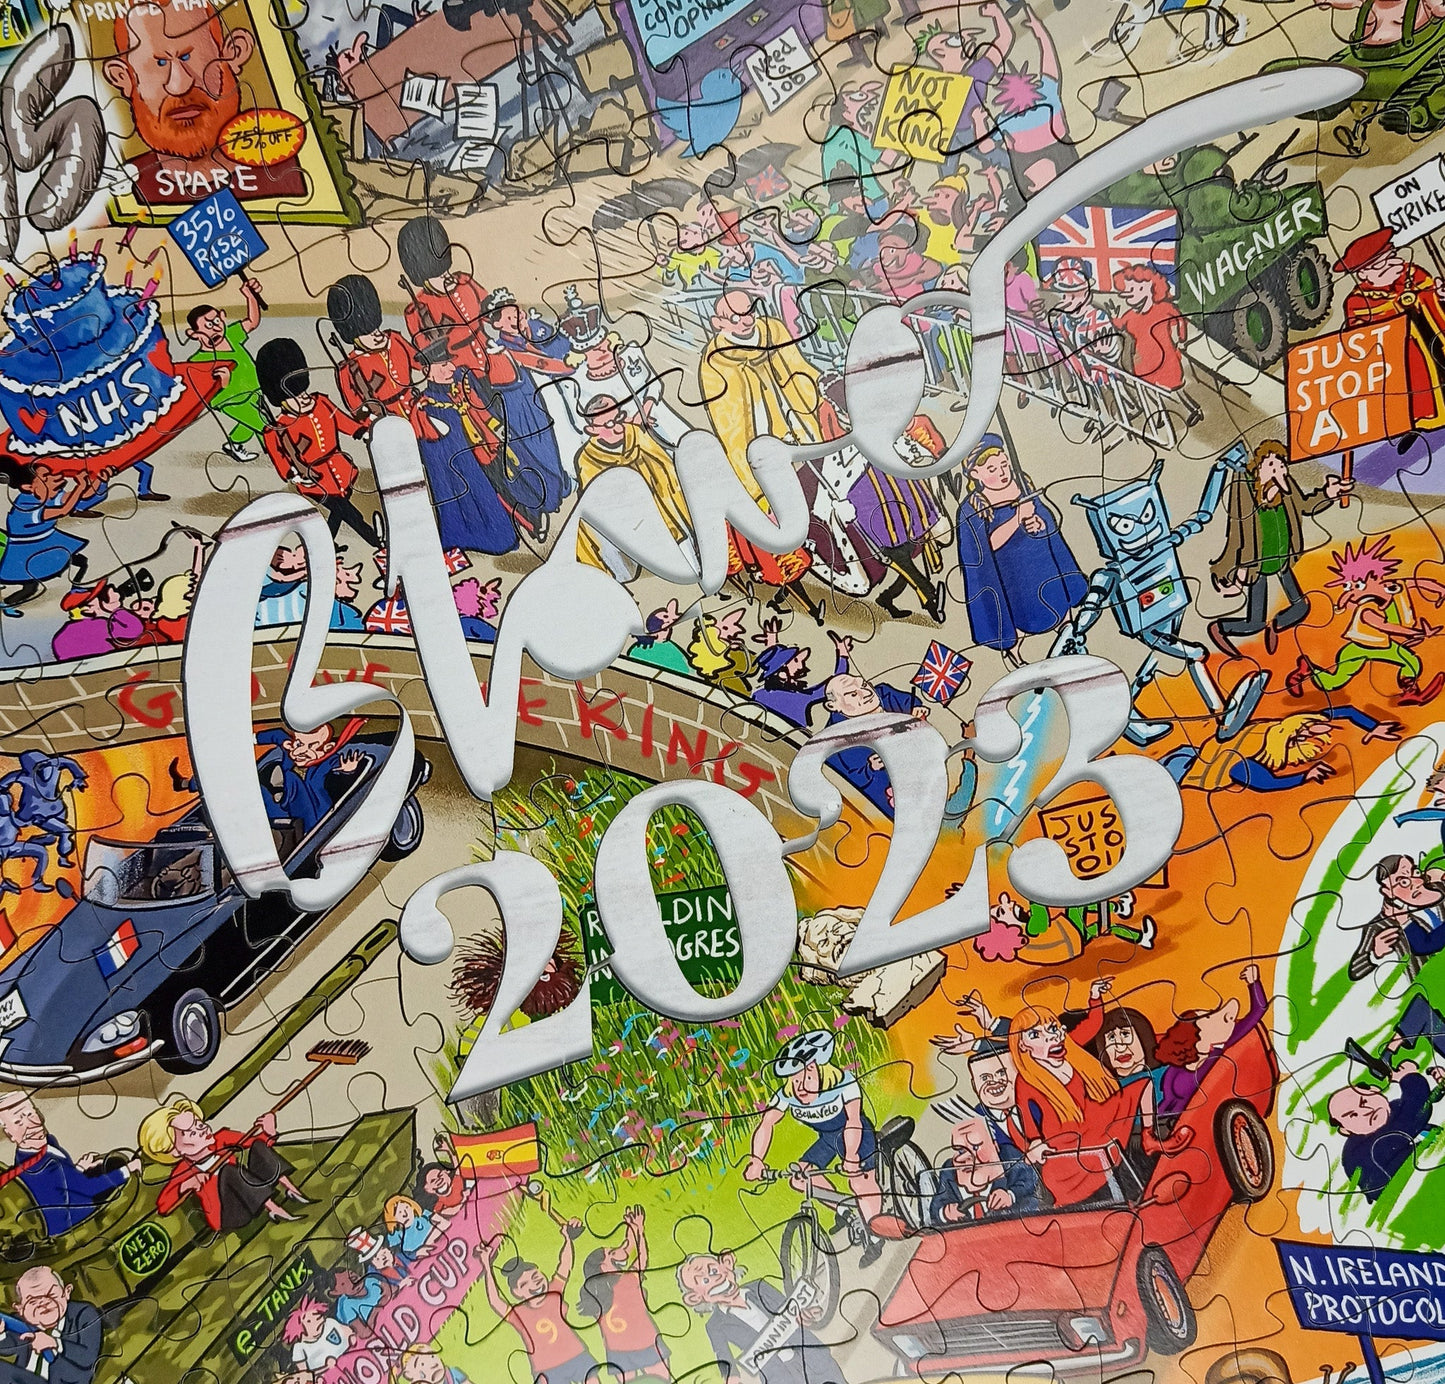 2023 According to Blower 1000 Piece Jigsaw Puzzle